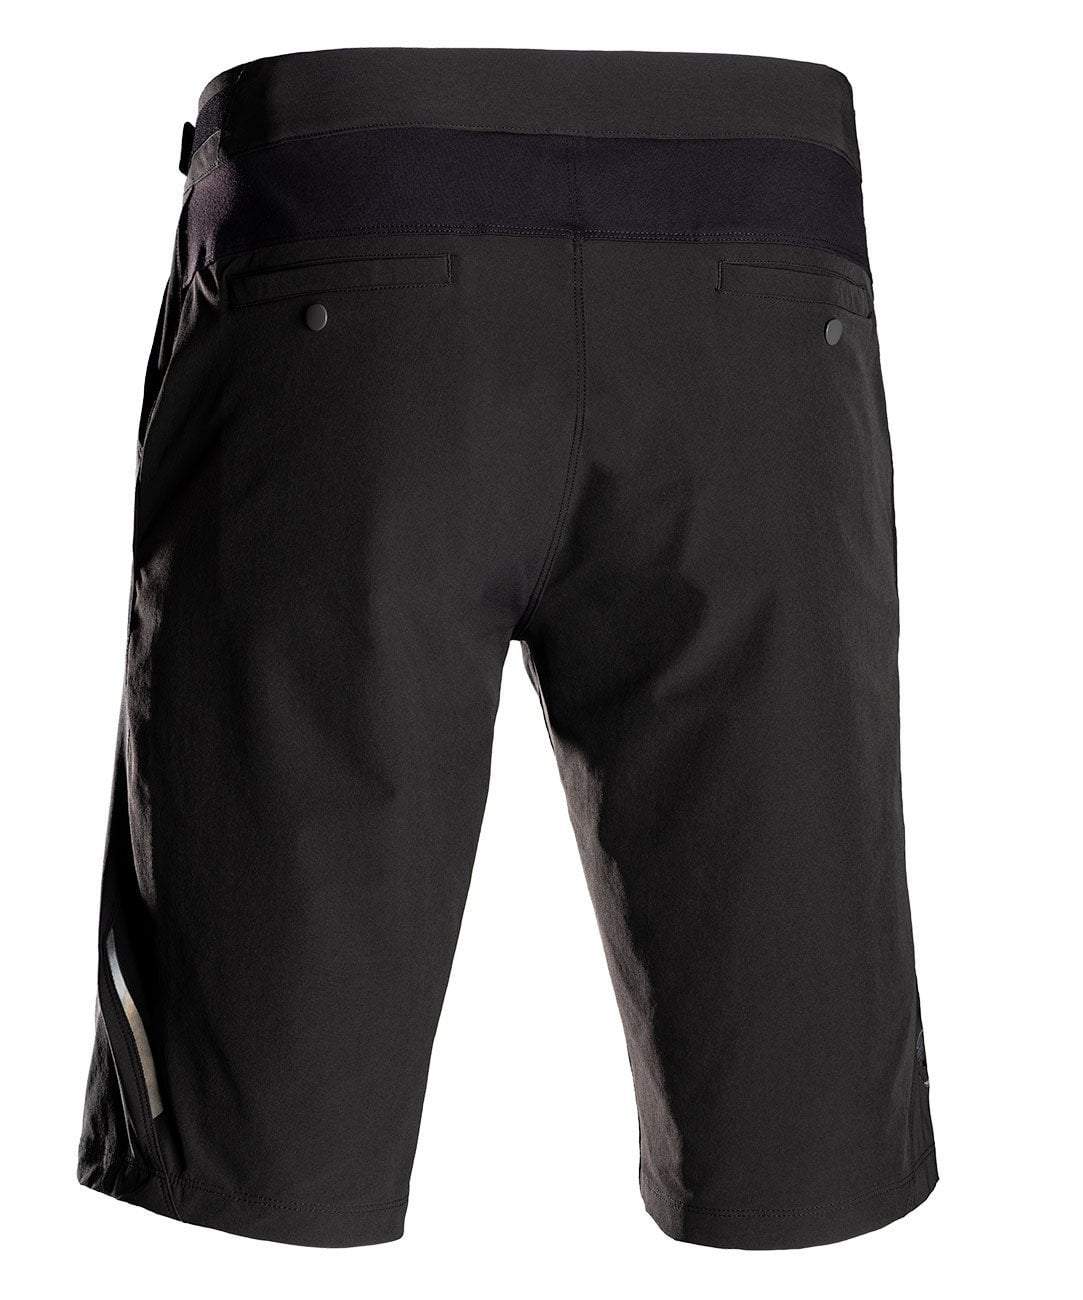 Men's Cross Country DWR Shorts | Showers Pass